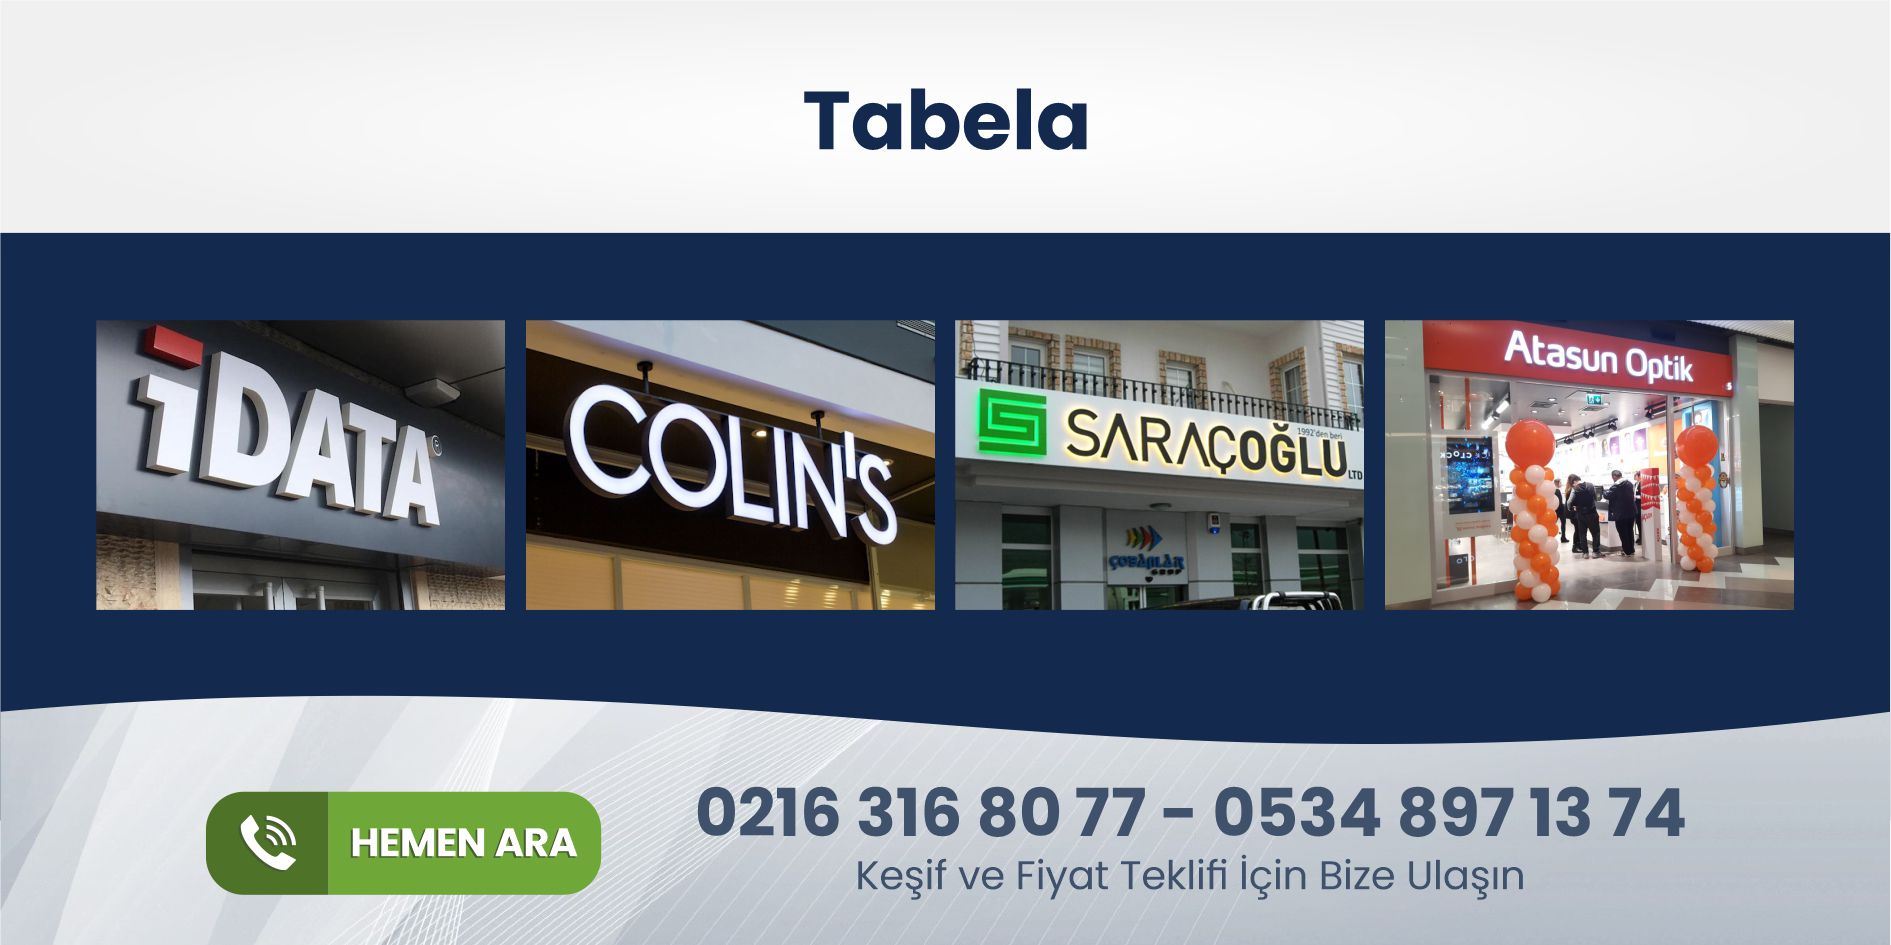 You are currently viewing İkbal Caddesi Tabela